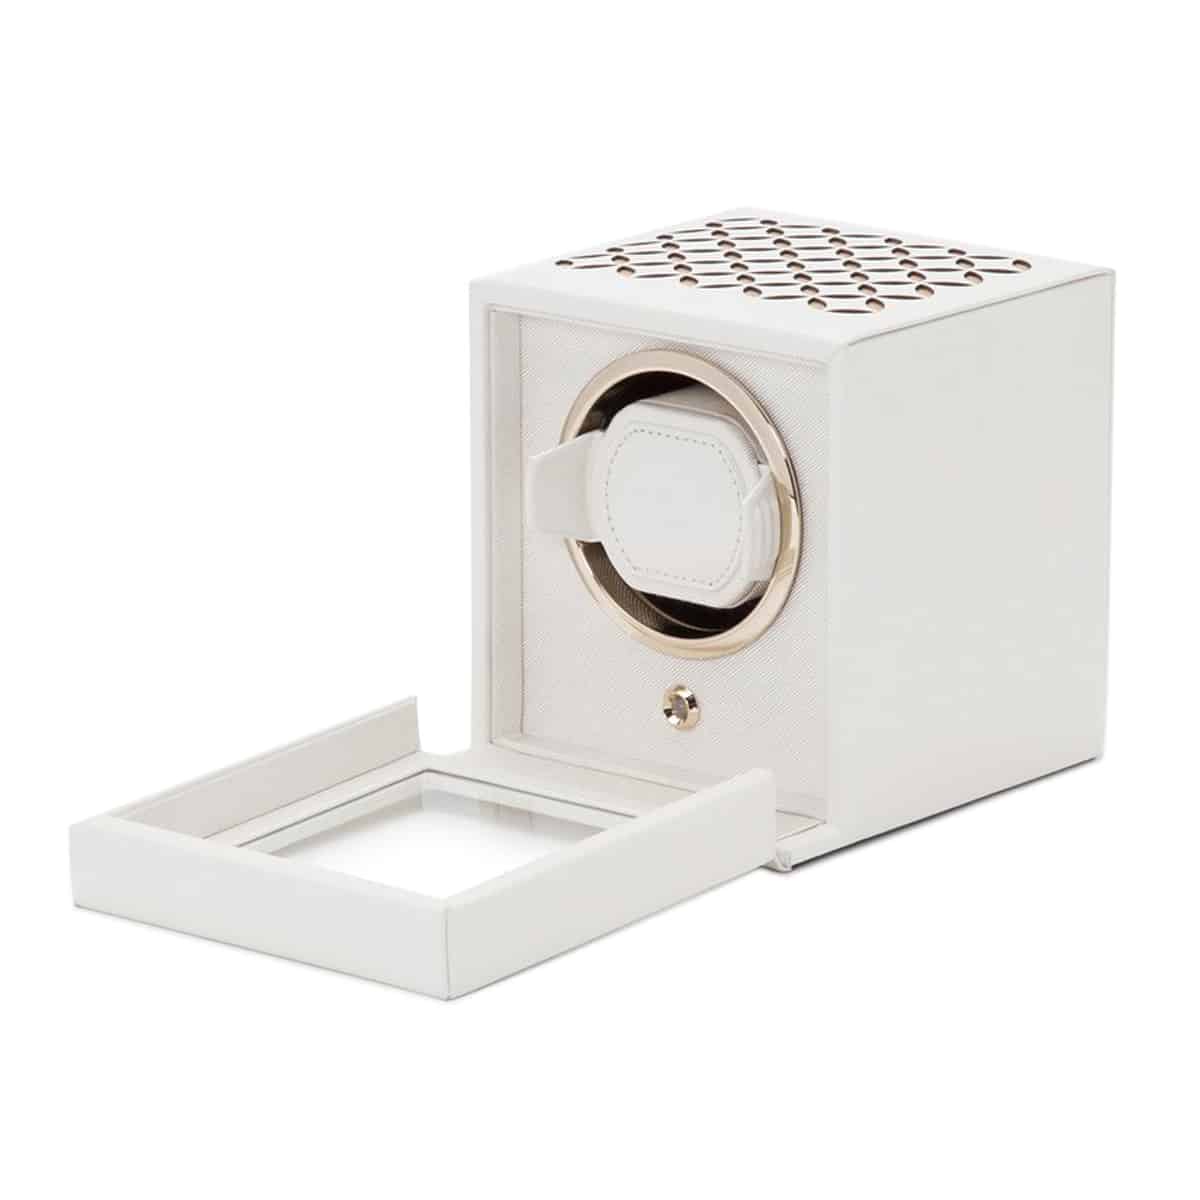 Wolf Chloé Single Watch Winder With Cover